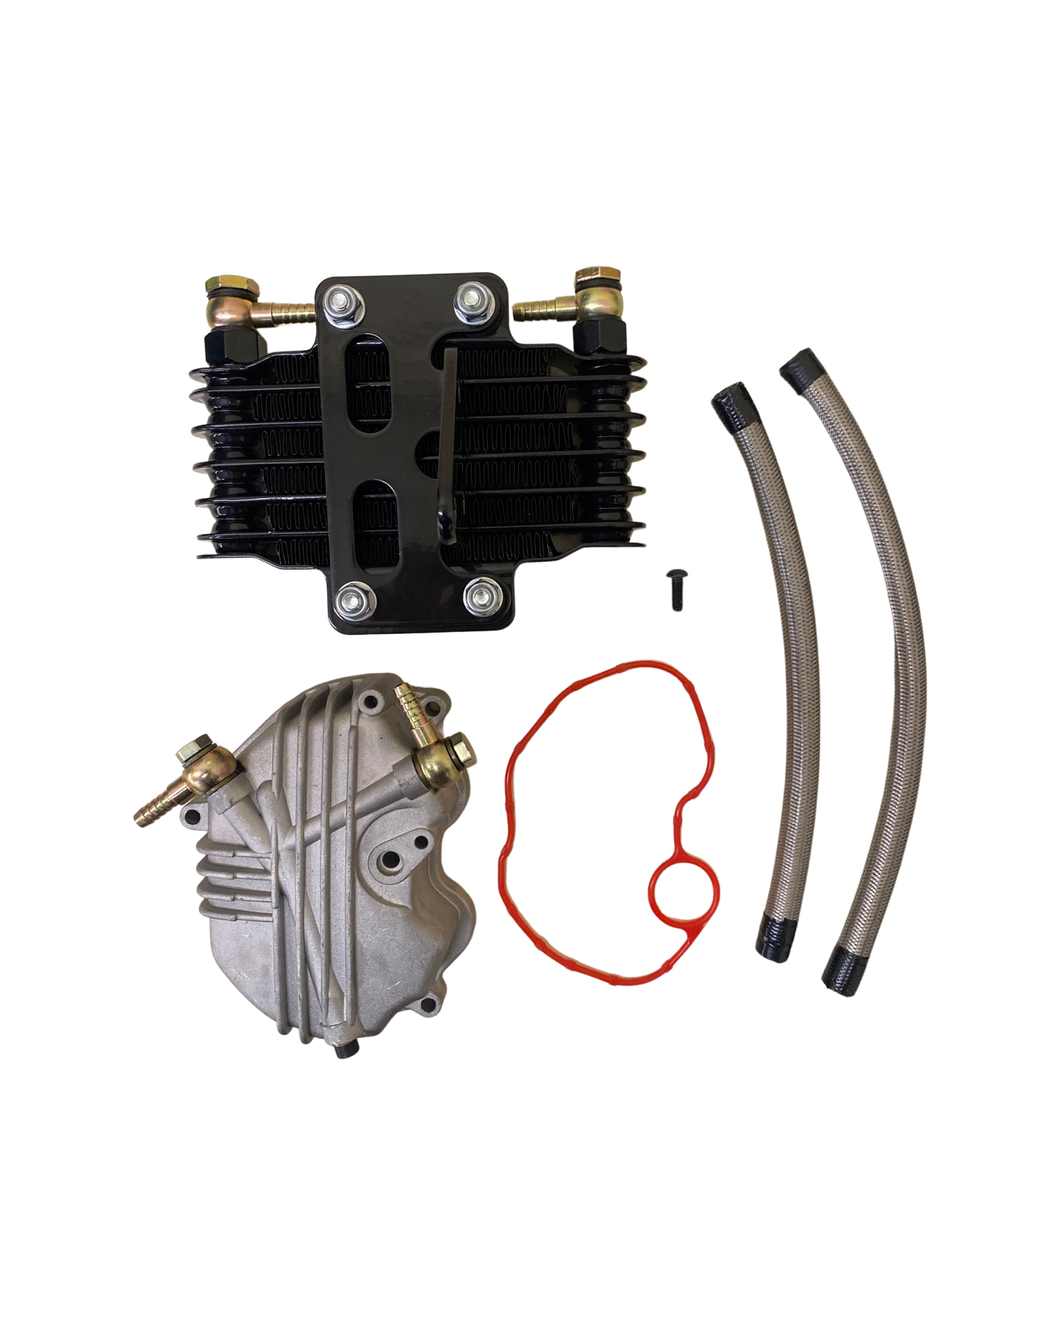 Deluxe oil cooler kit for Hawk 250, Hawk DLX, Tao Tao TBR7, CSC TT250, and more